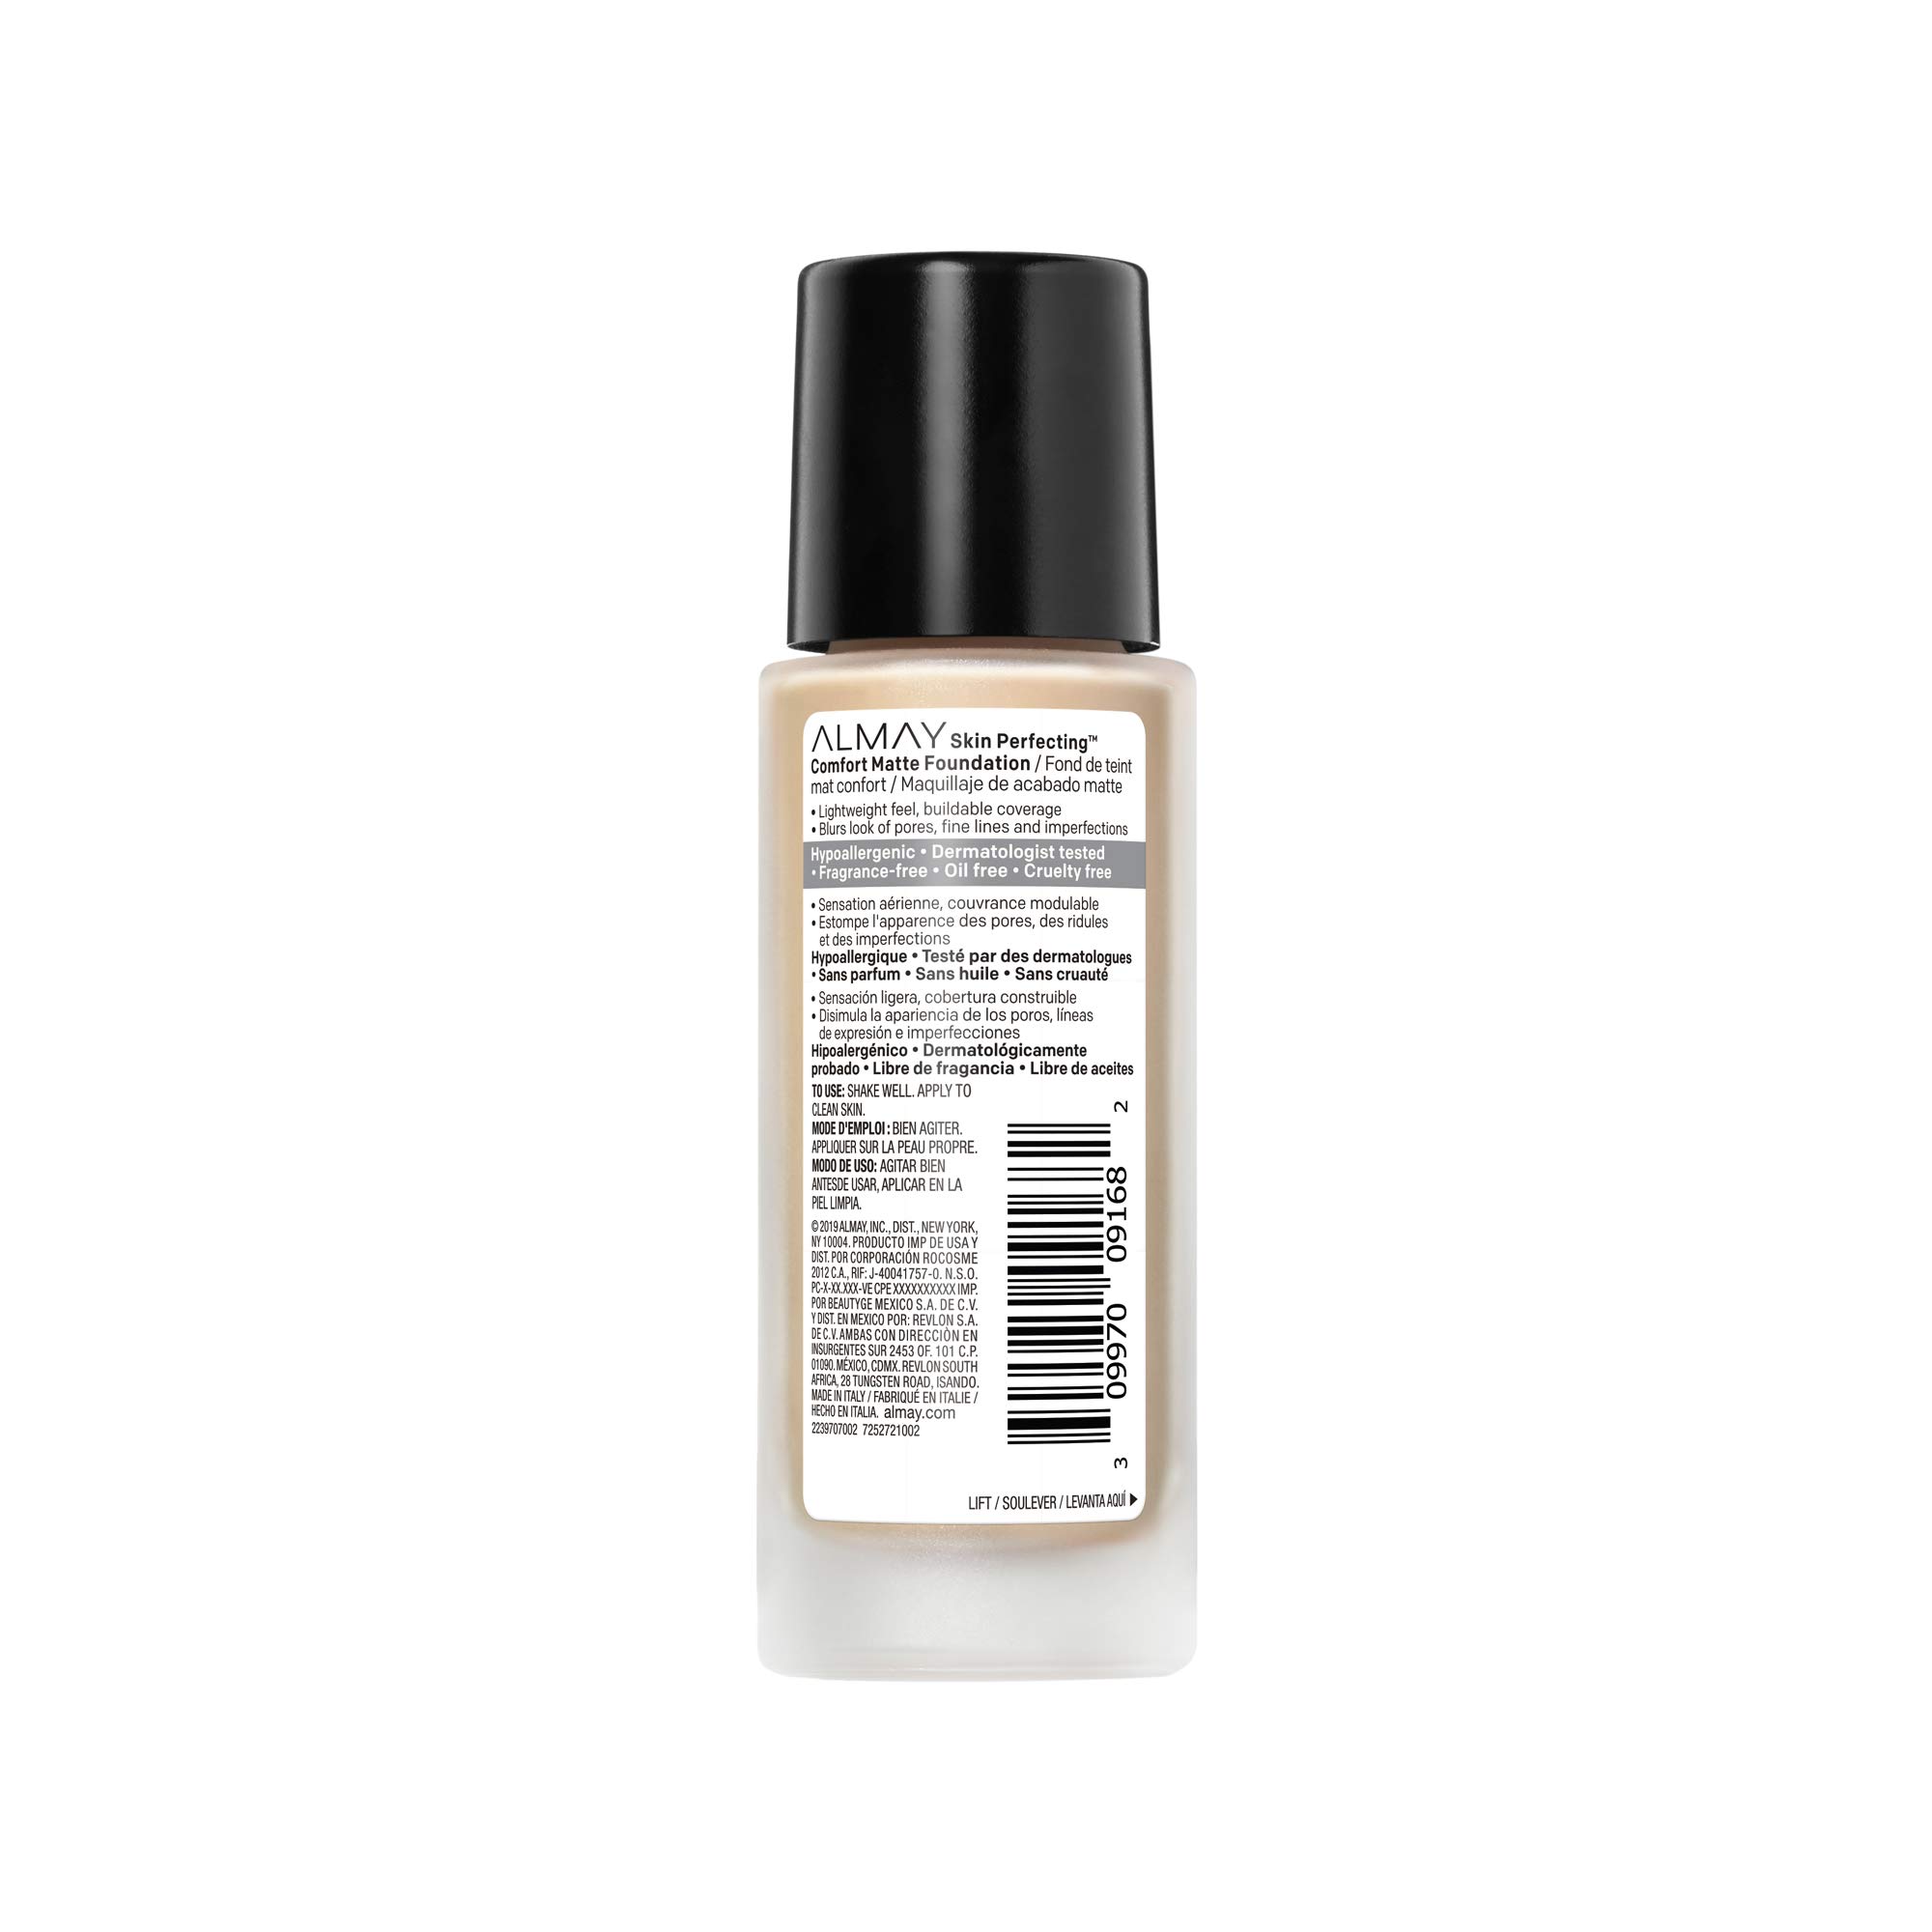 Almay Skin Perfecting Comfort Matte Foundation, Hypoallergenic, Cruelty Free, -Fragrance Free, Dermatologist Tested Liquid Makeup, Neutral Buff, 1 Fluid Ounce